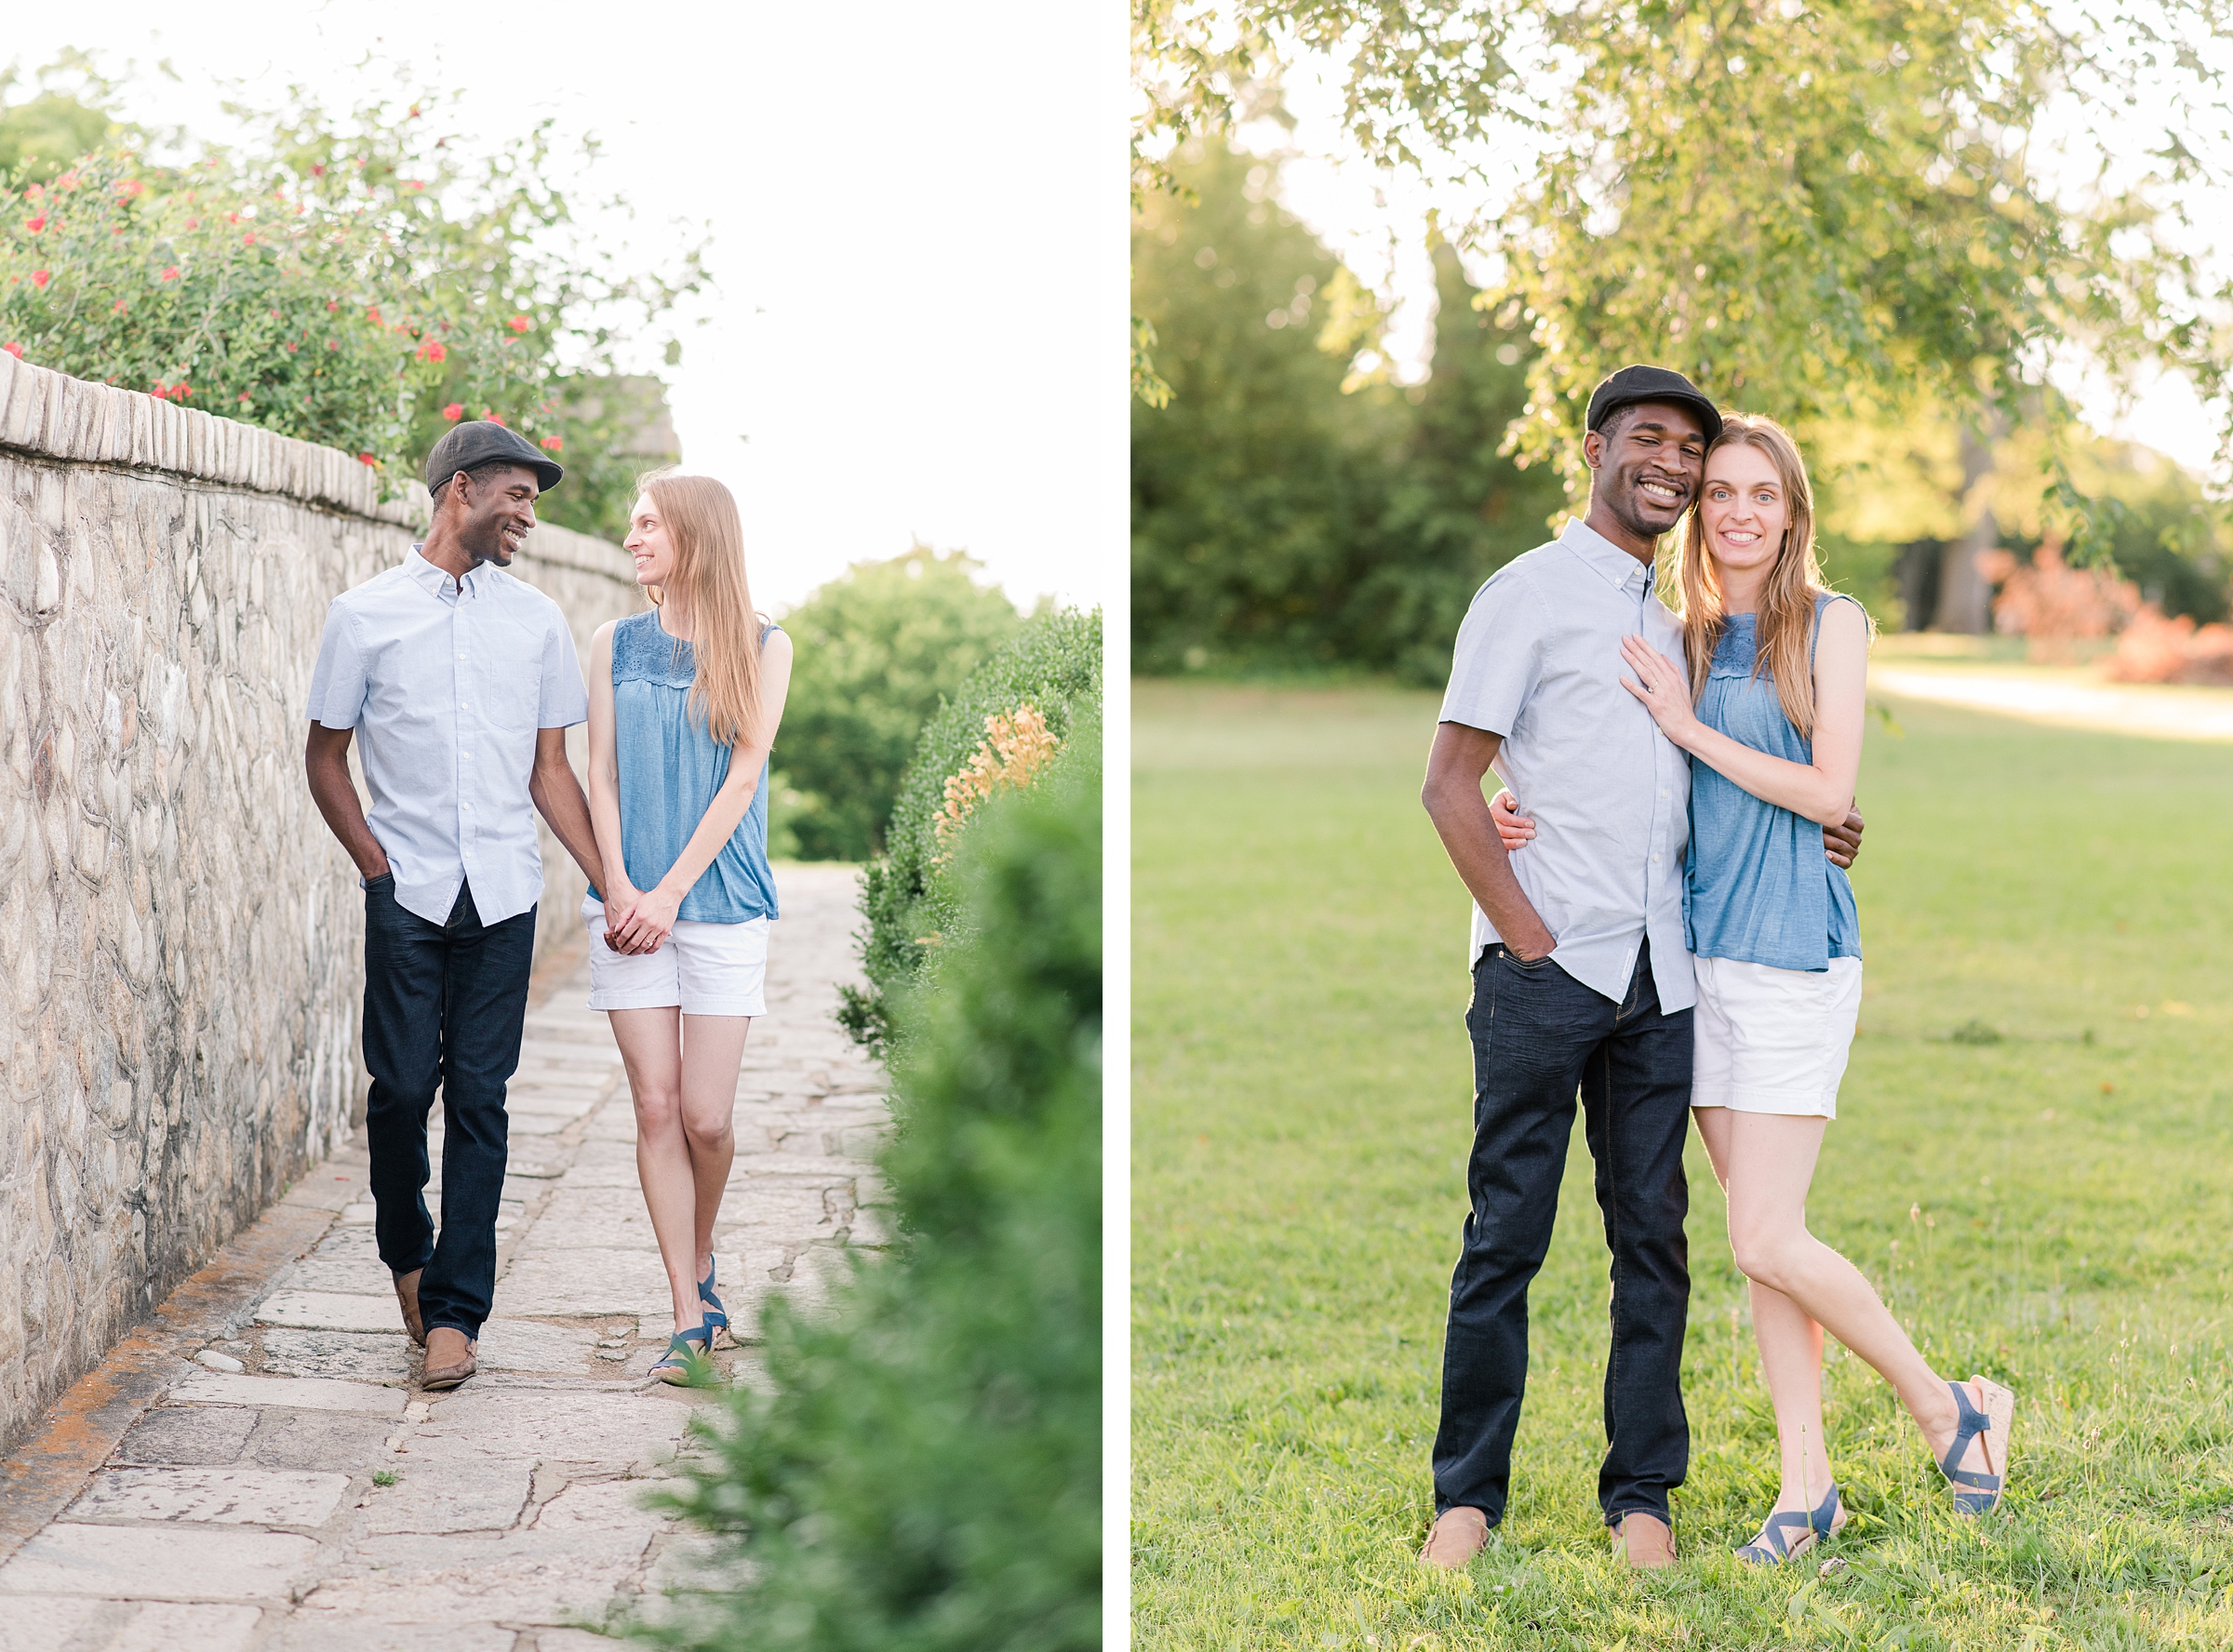 Spring Maymont Engagement Session in Richmond, Virginia by Kailey Brianne Photography